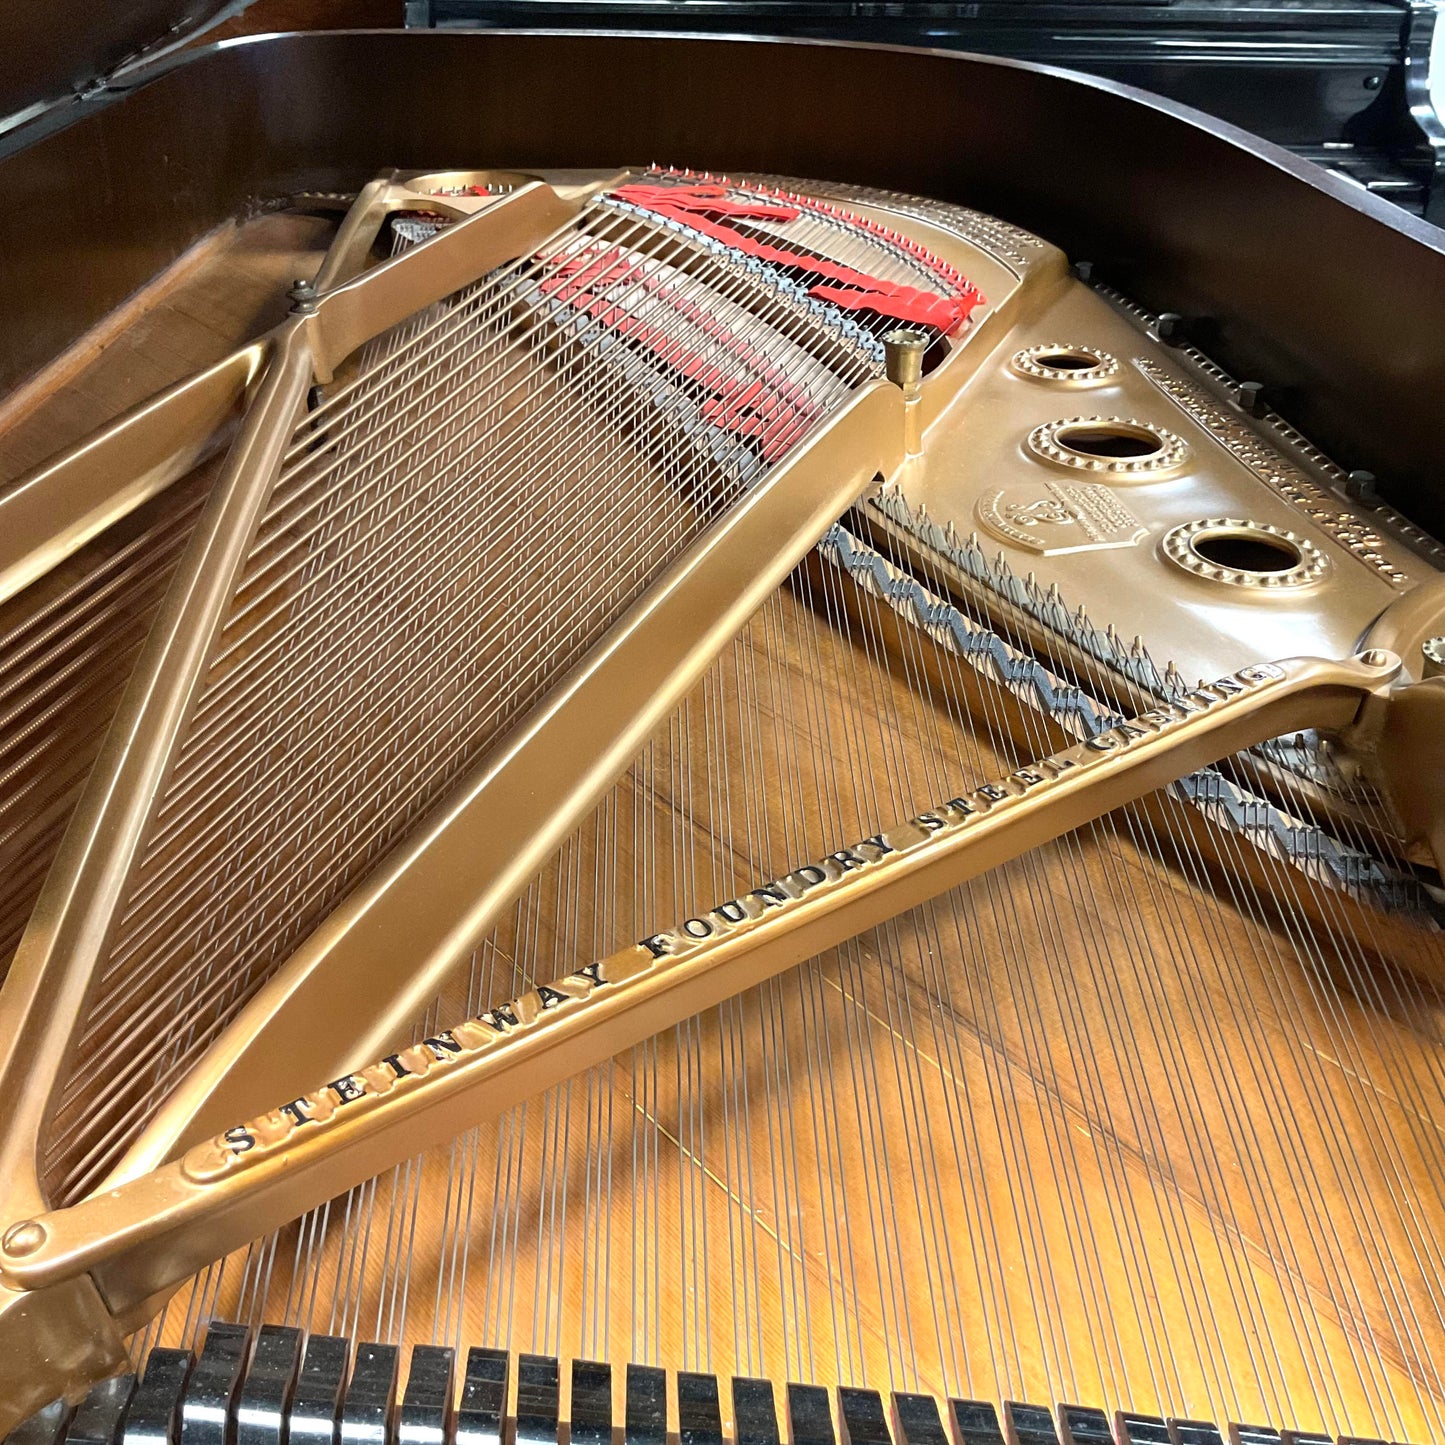 Pre-Owned Grand Steinway Model B - 1896 Edition (Rebuilt)